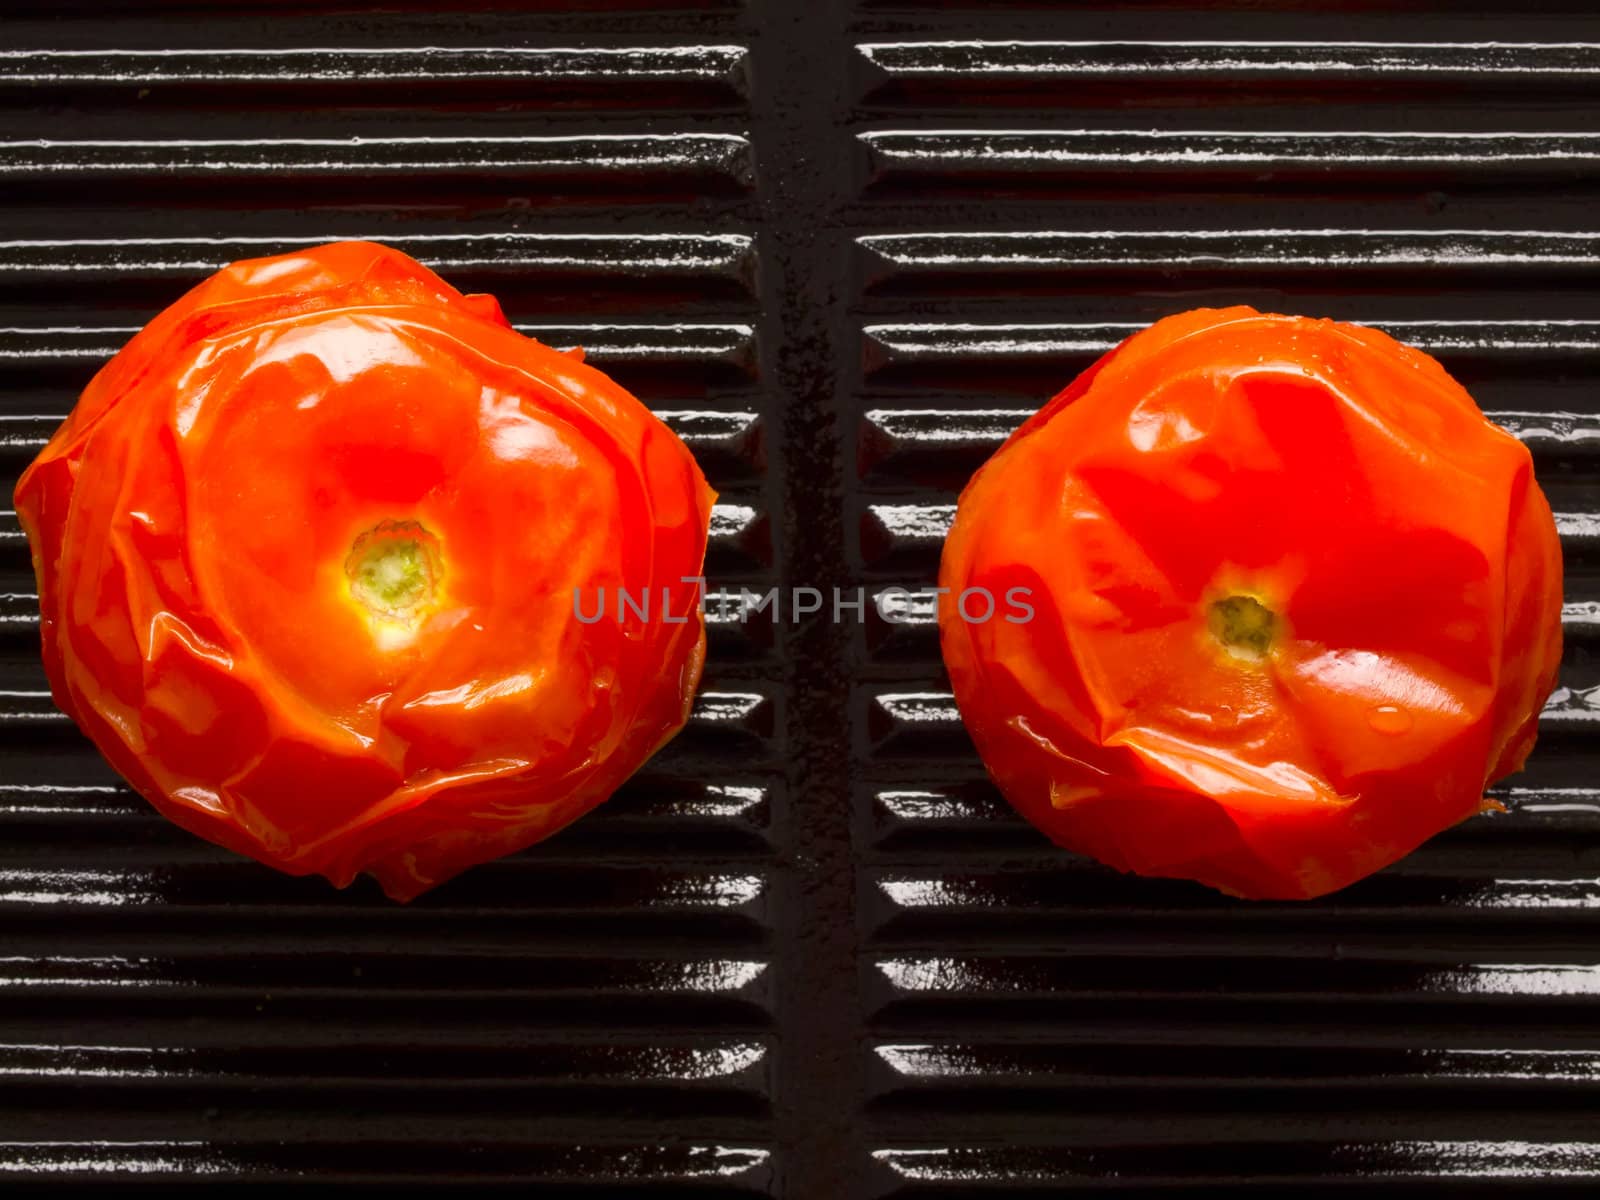 baked tomatoes by zkruger